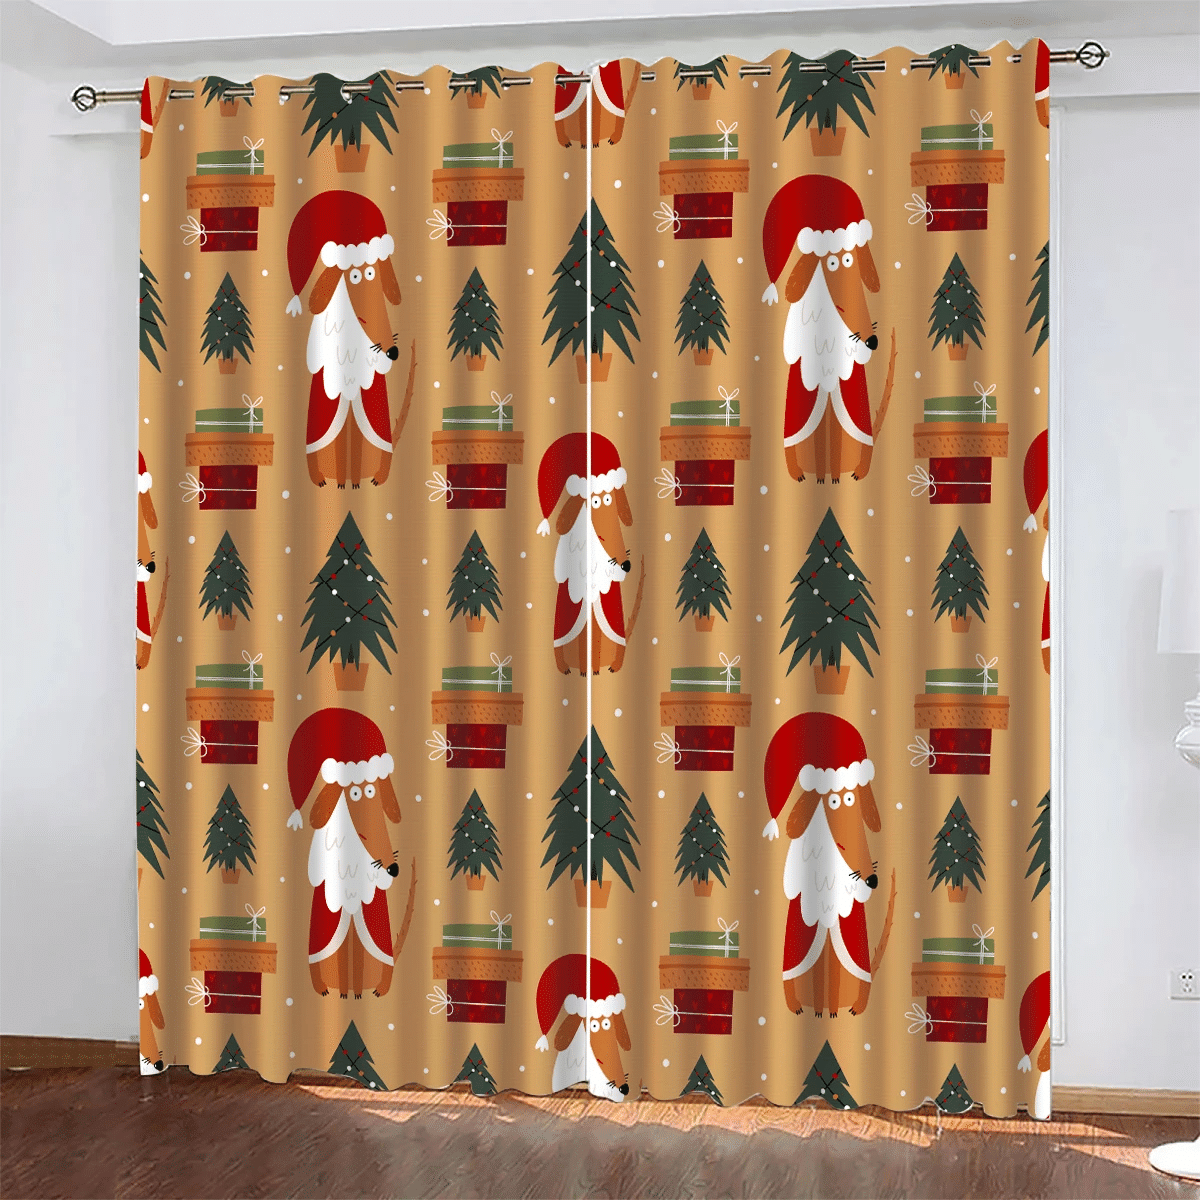 Christmas Background Dachshunds With Santa Claus Window Curtains Door Curtains Home Decor